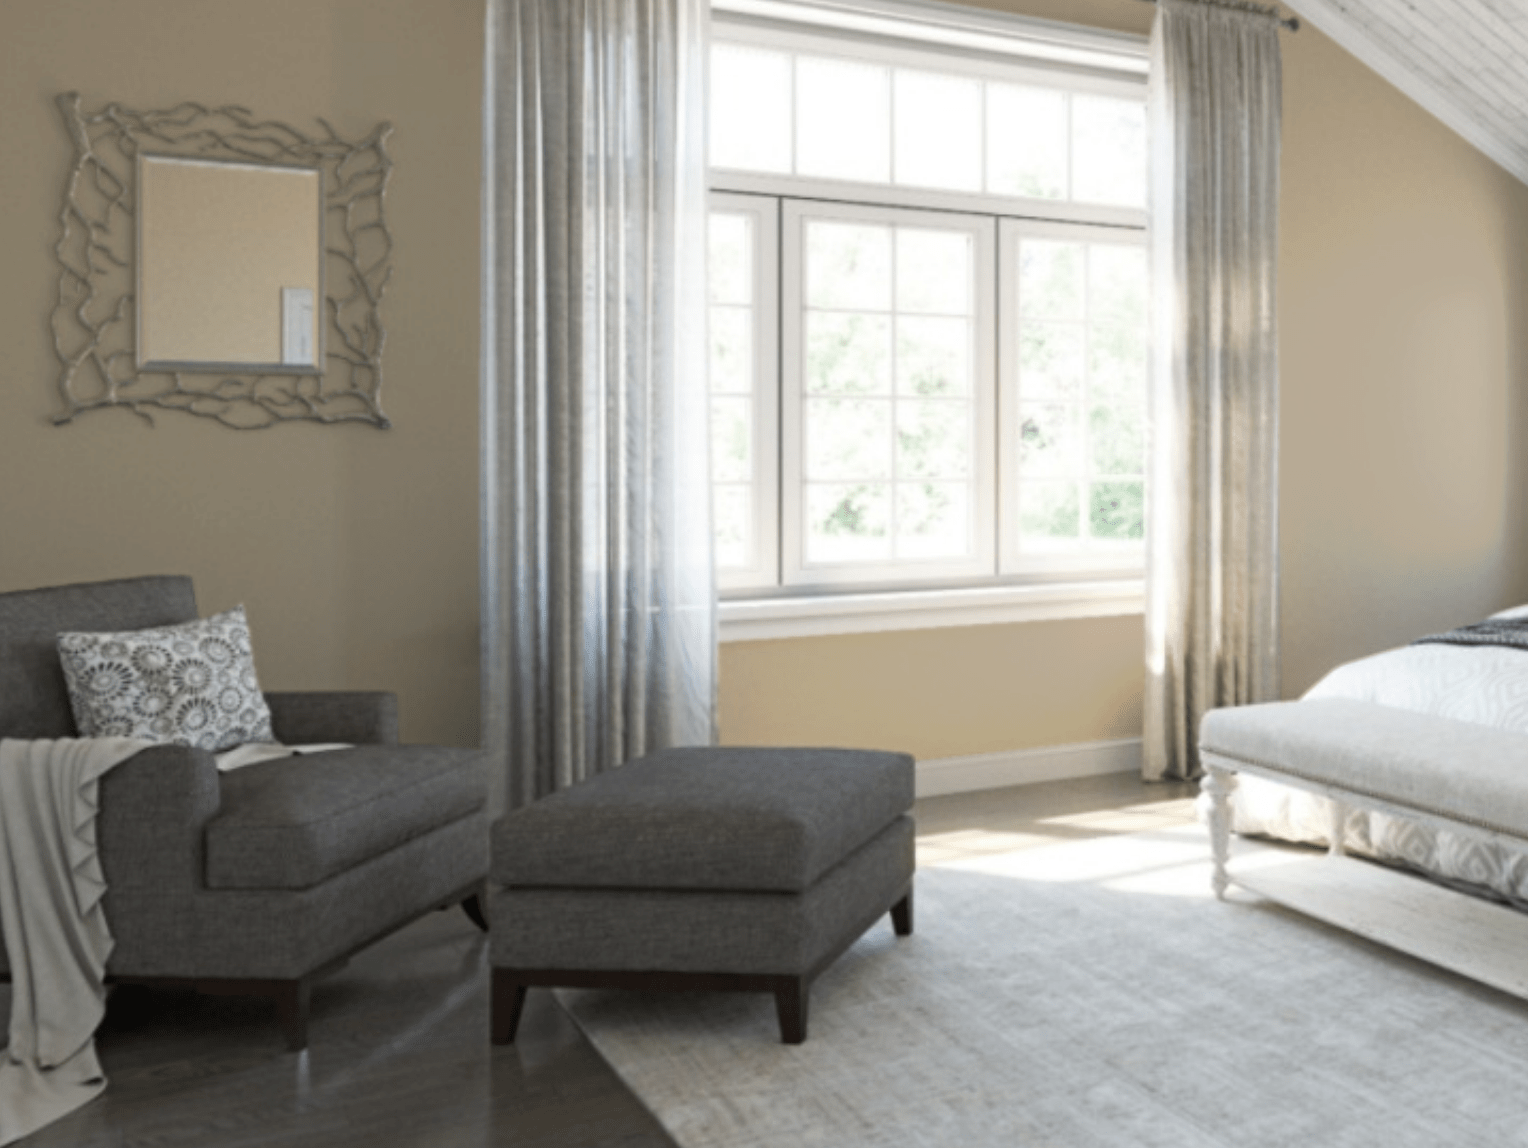 arm chair in room with beige walls